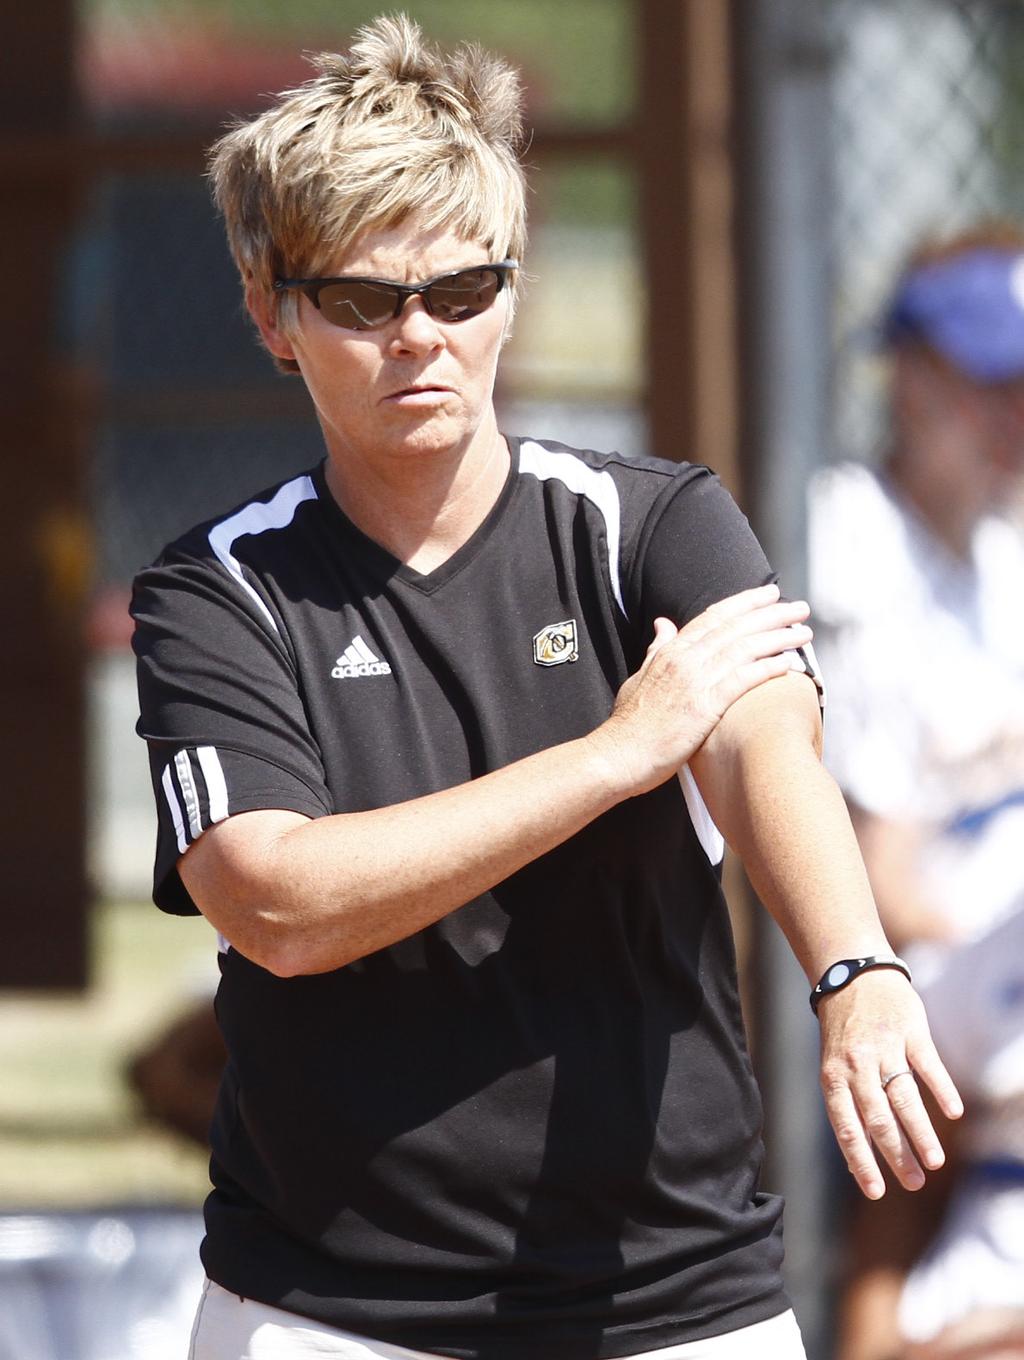 After the 2012 season Watson has put together 405 career wins as a head coach. During in her time at Cameron, Watson has won 105 games, including a 32 win season in 2009.